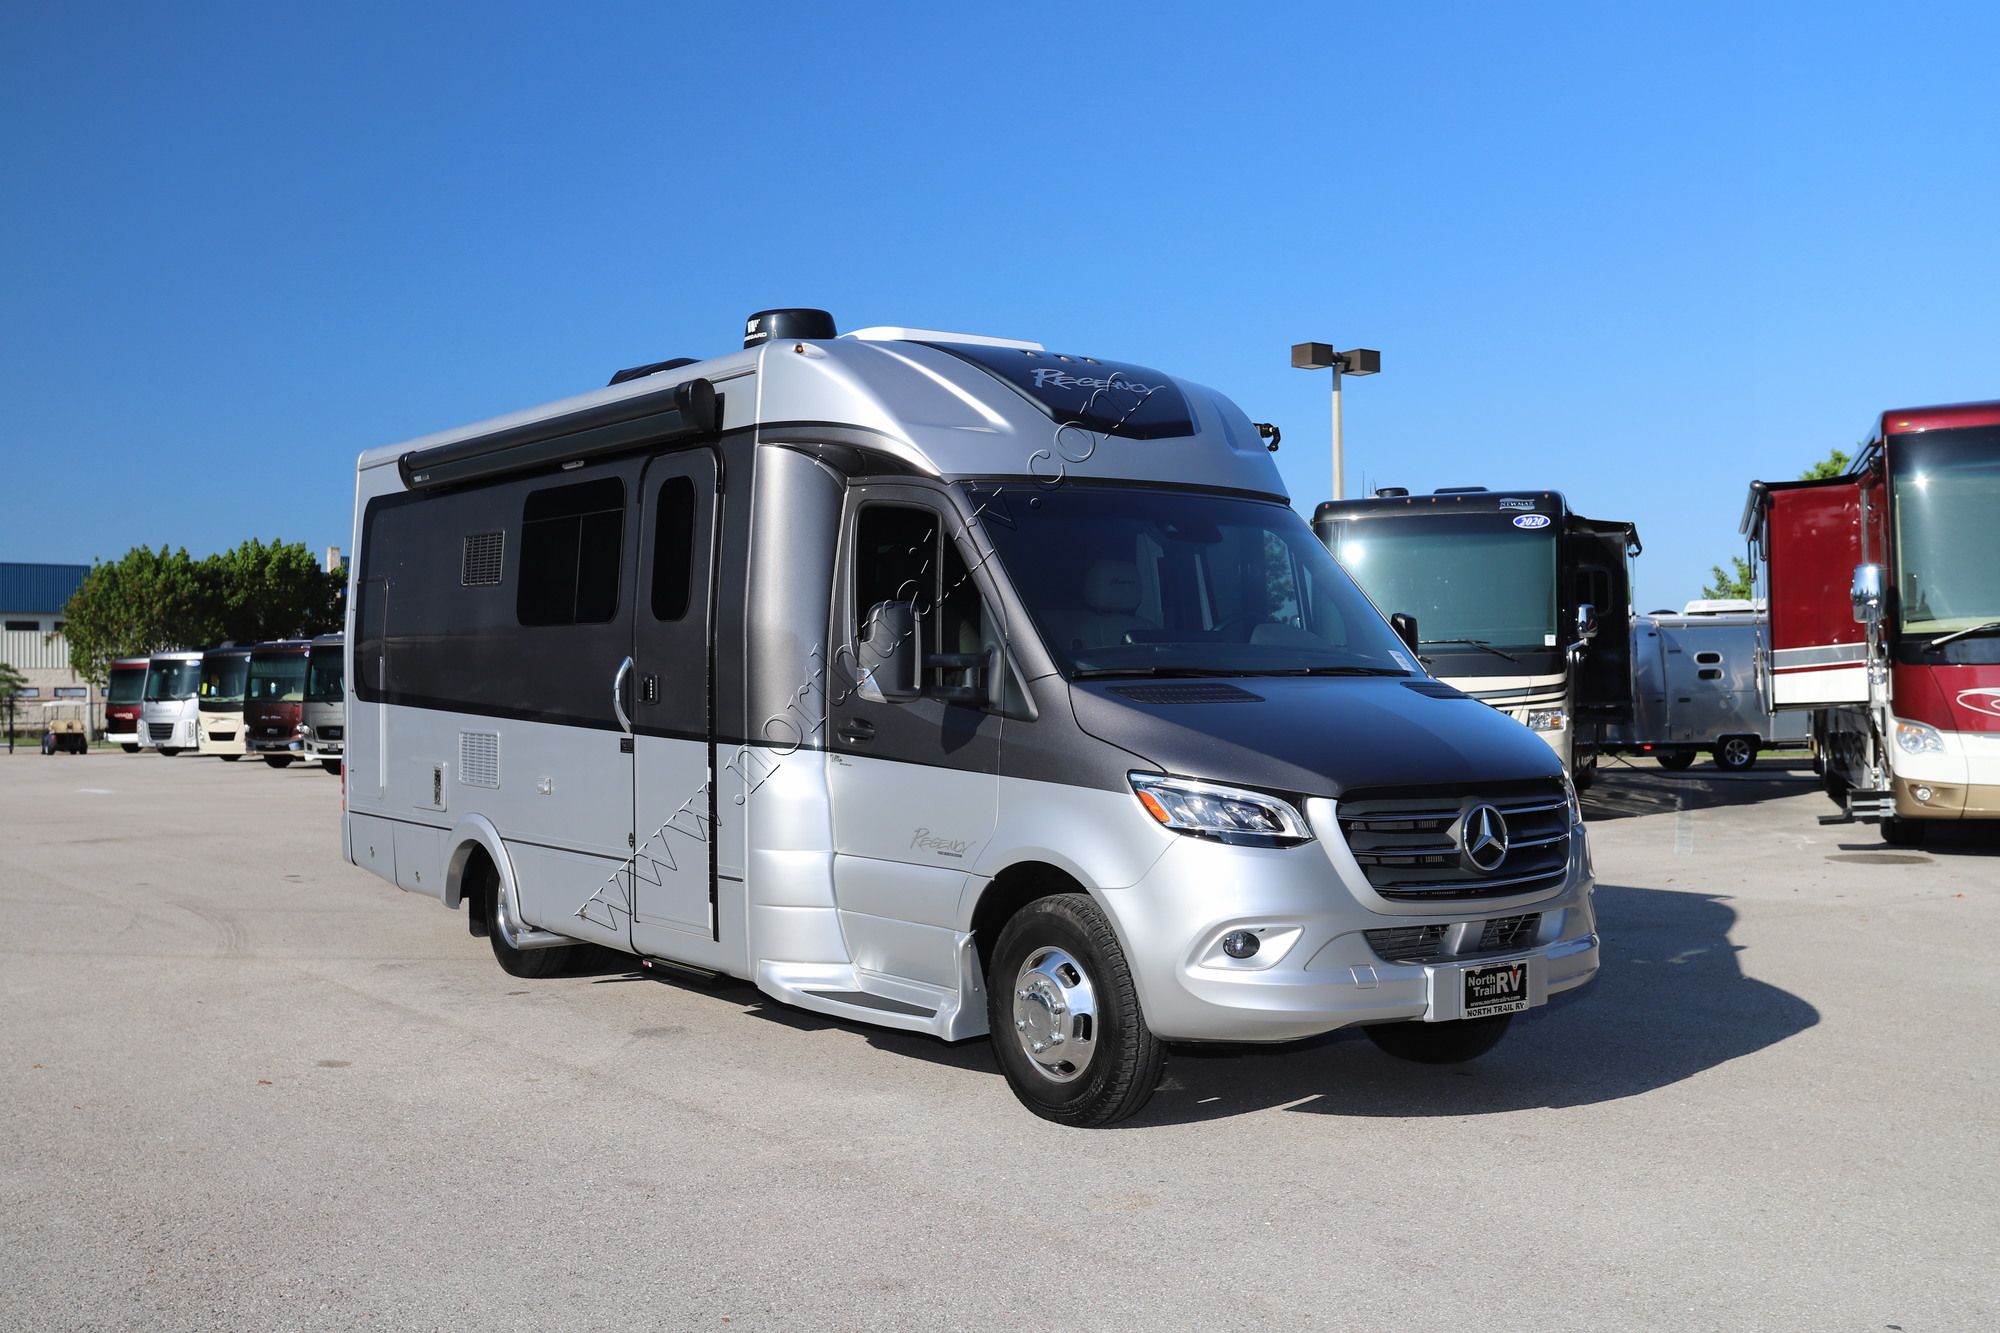 Used 2021 Regency Ultra Brougham 25MB Class C  For Sale